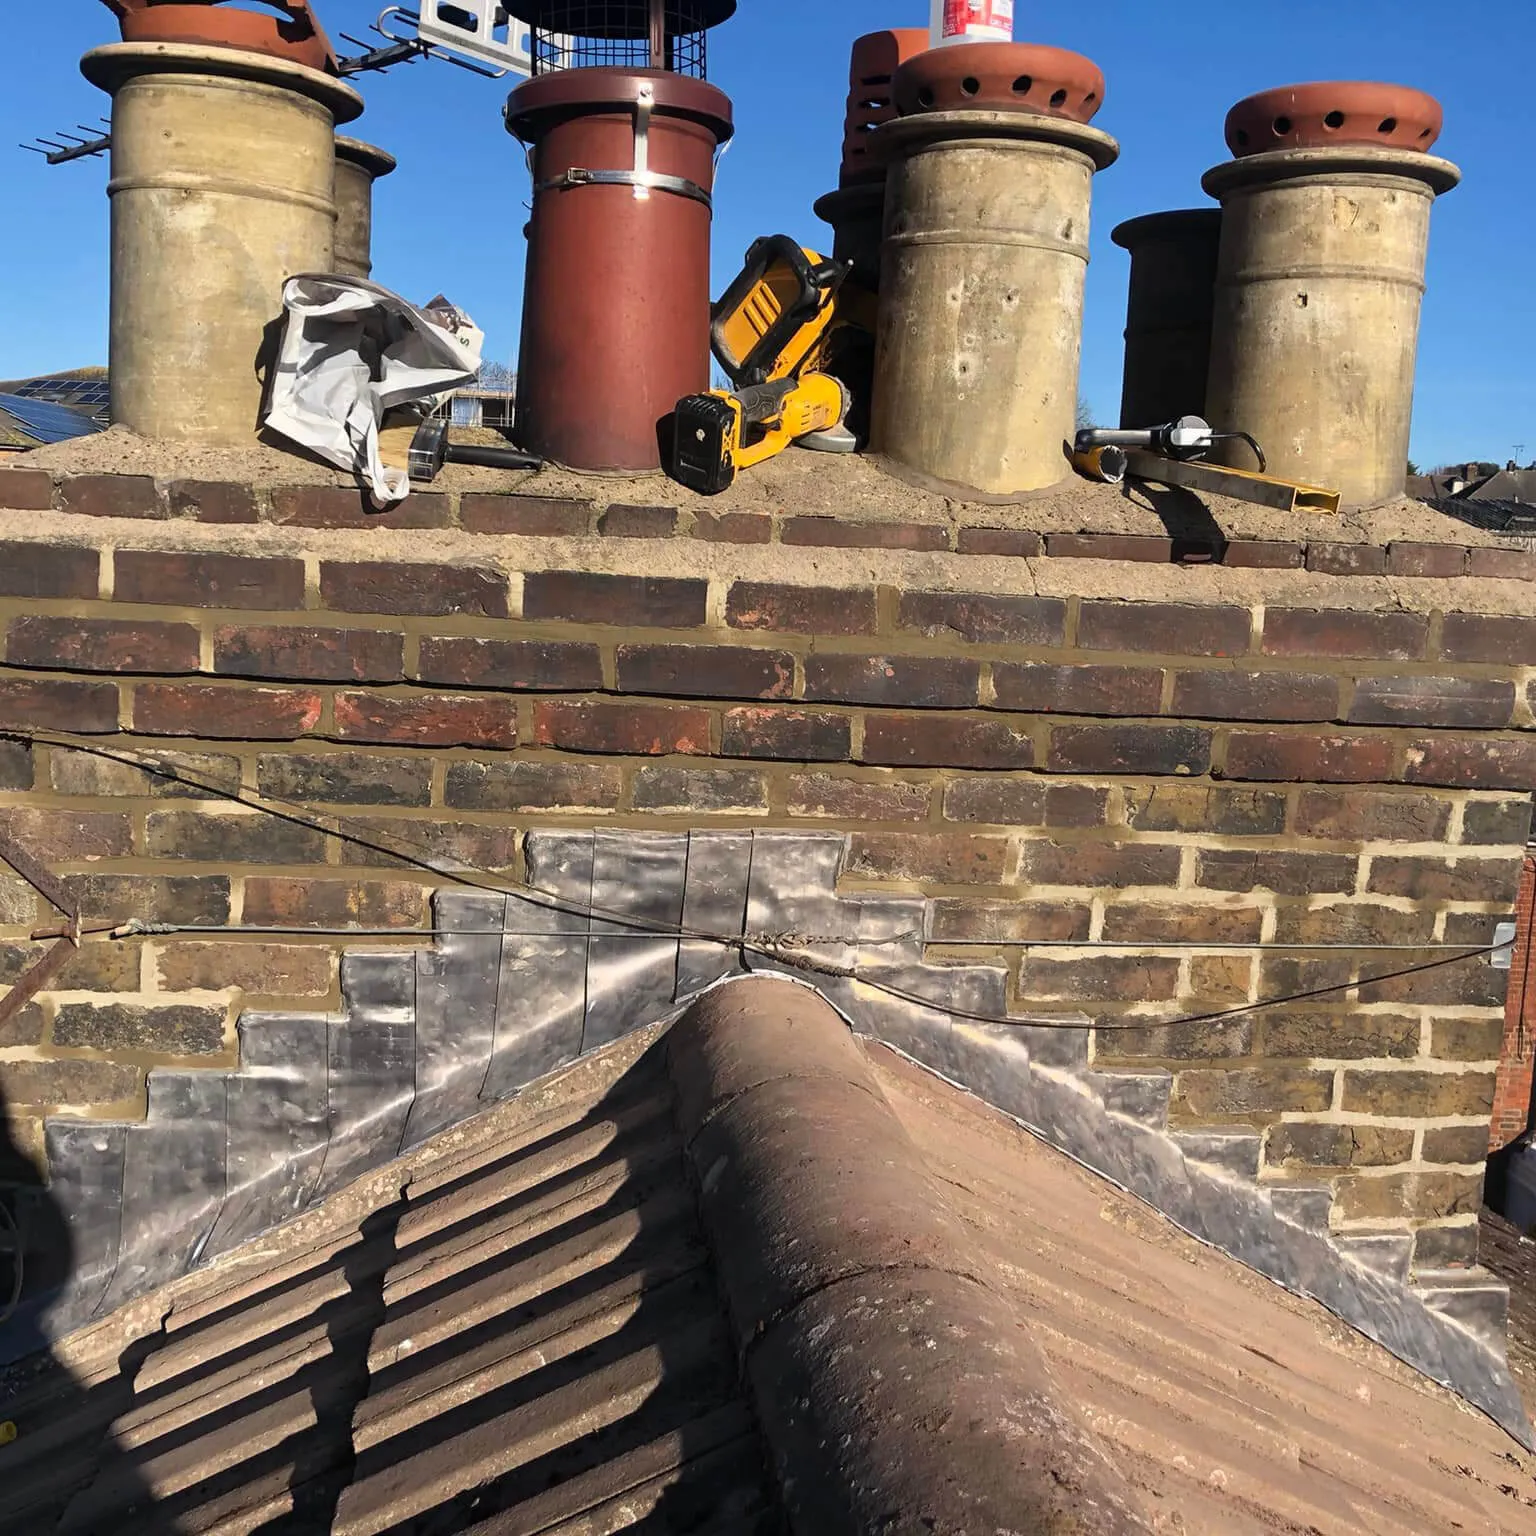 a brick wall with chimneys and a tiled roof